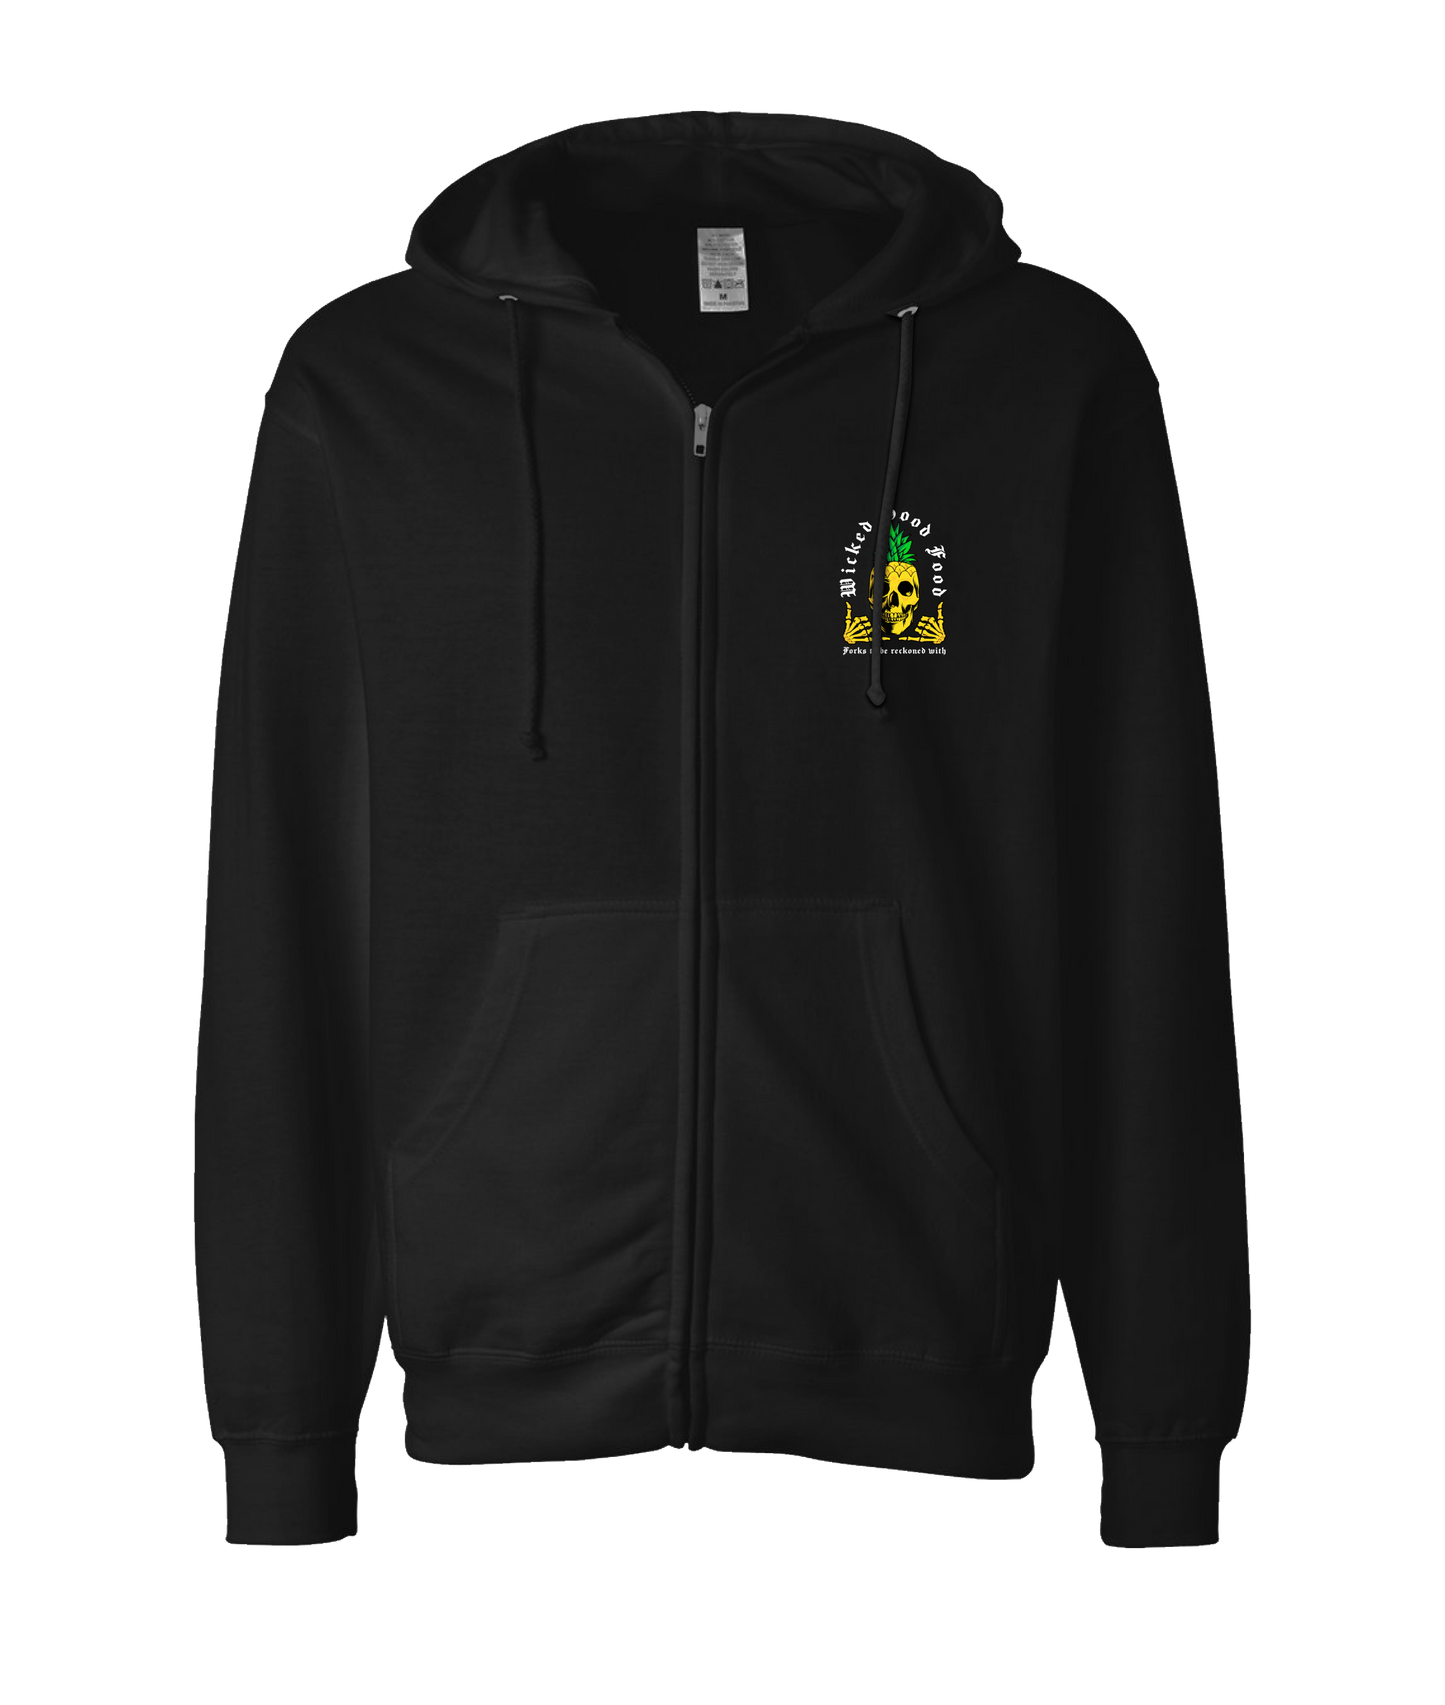 The Wicked Kitchen - Forks to be Reckoned With - Black Zip Up Hoodie